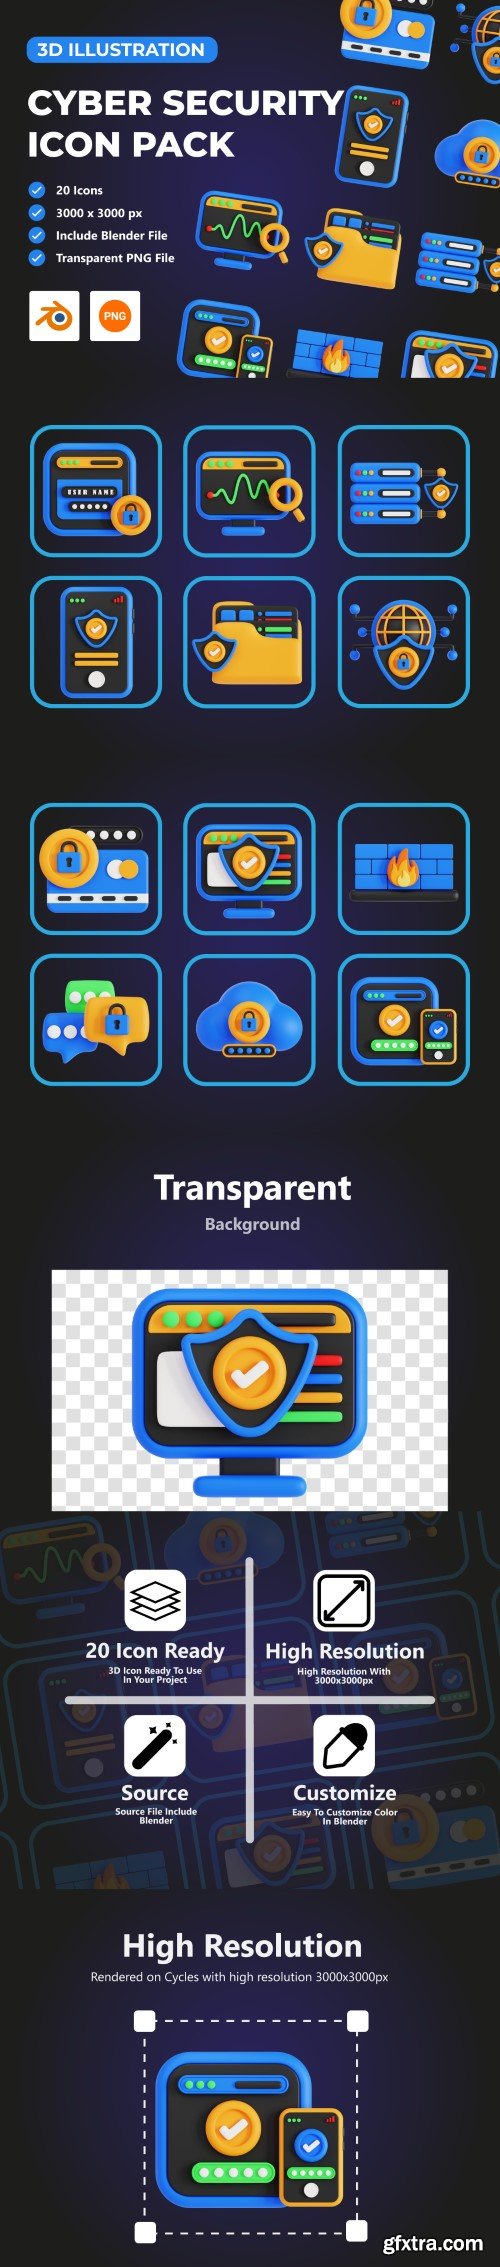 UI8 - Cyber Security 3D Pack